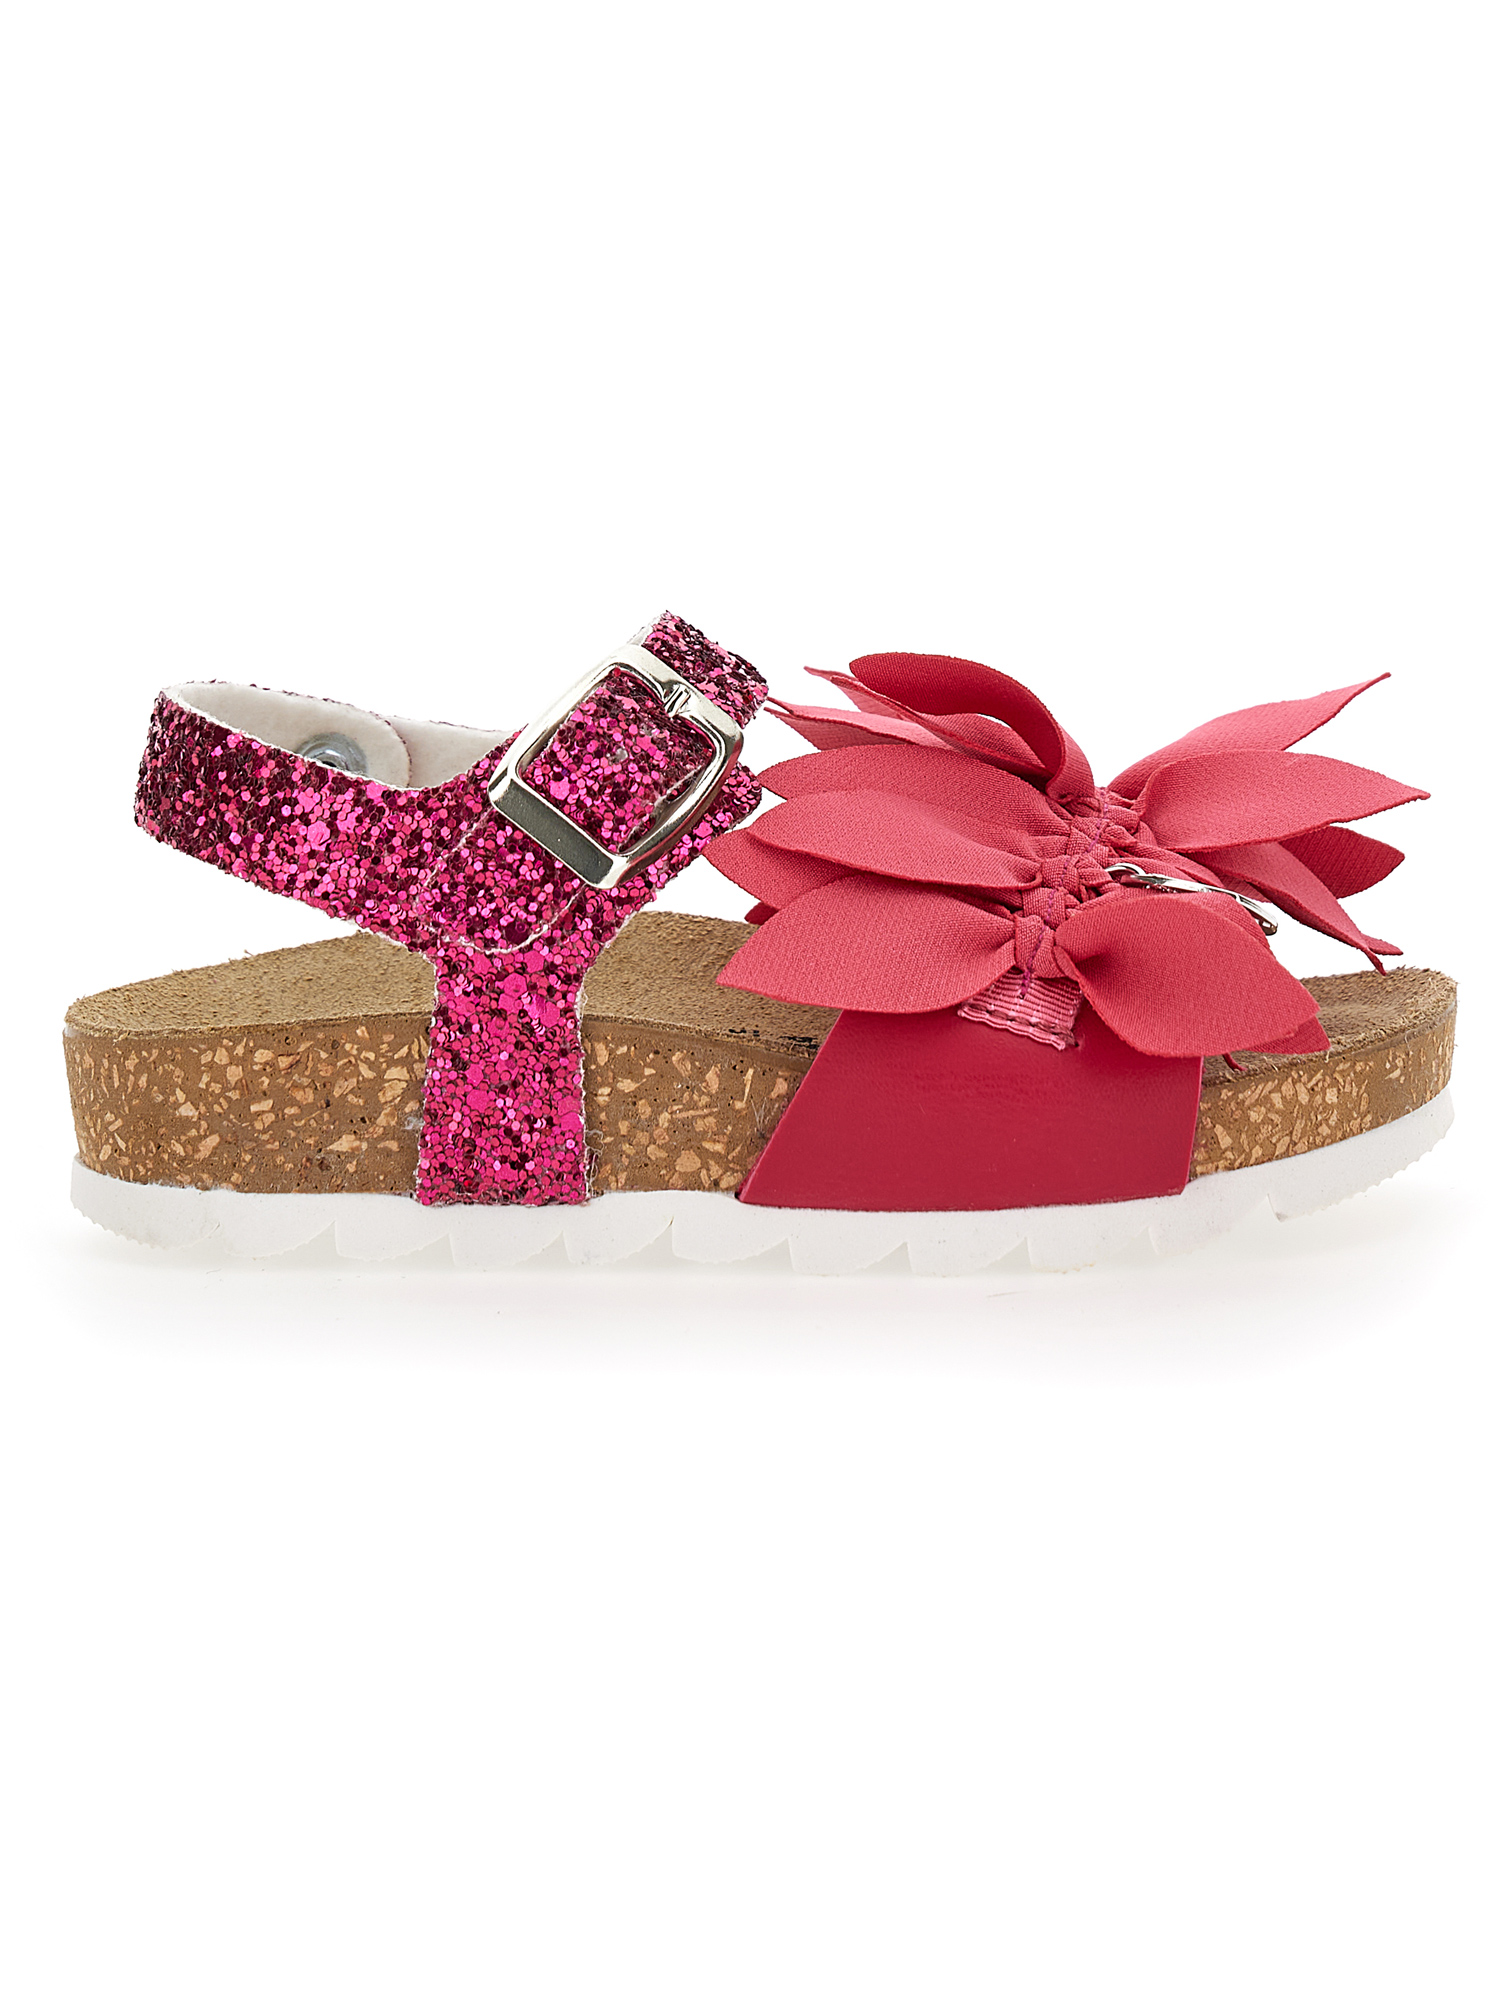 Monnalisa Glitter Sandals With Flowers In Bright Peach Pink